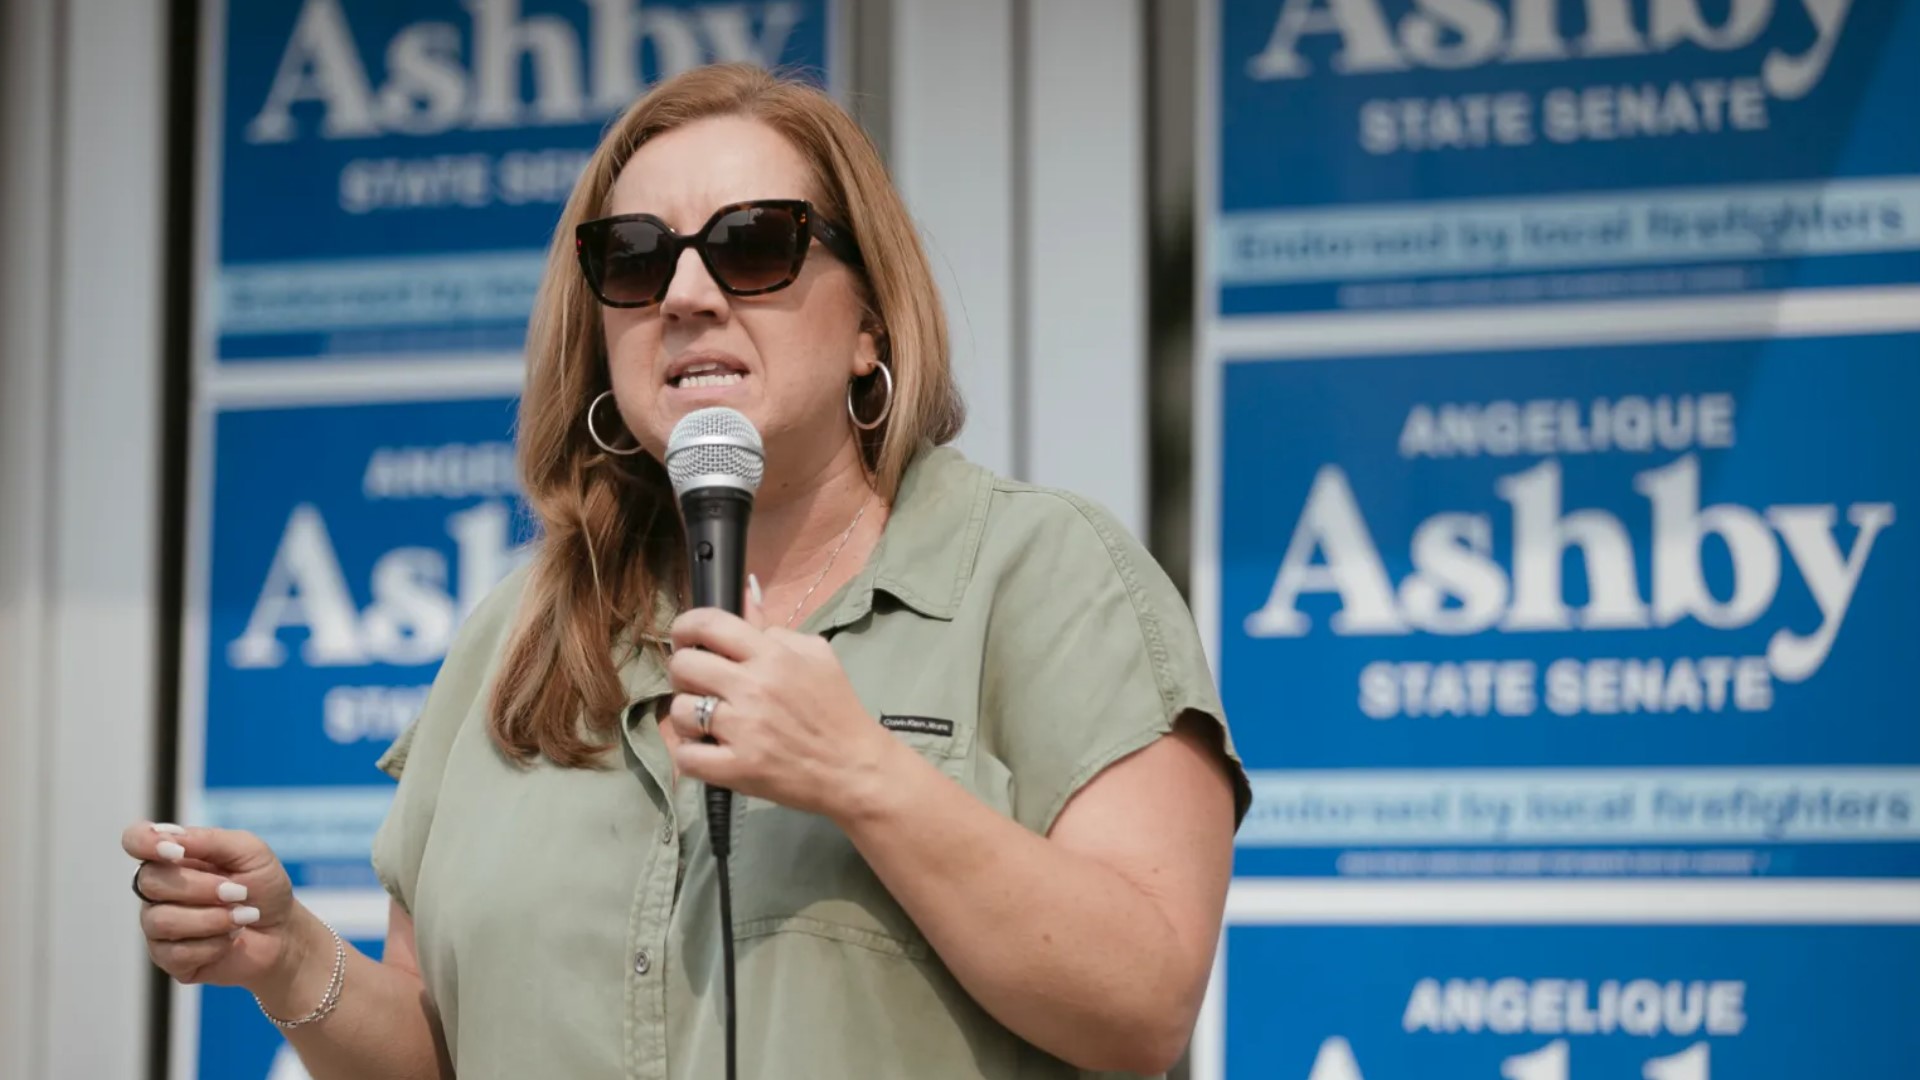 Sacramento Vice Mayor Angelique Ashby said sexist and threatening remarks directed to her and her colleague was unacceptable and dangerous.